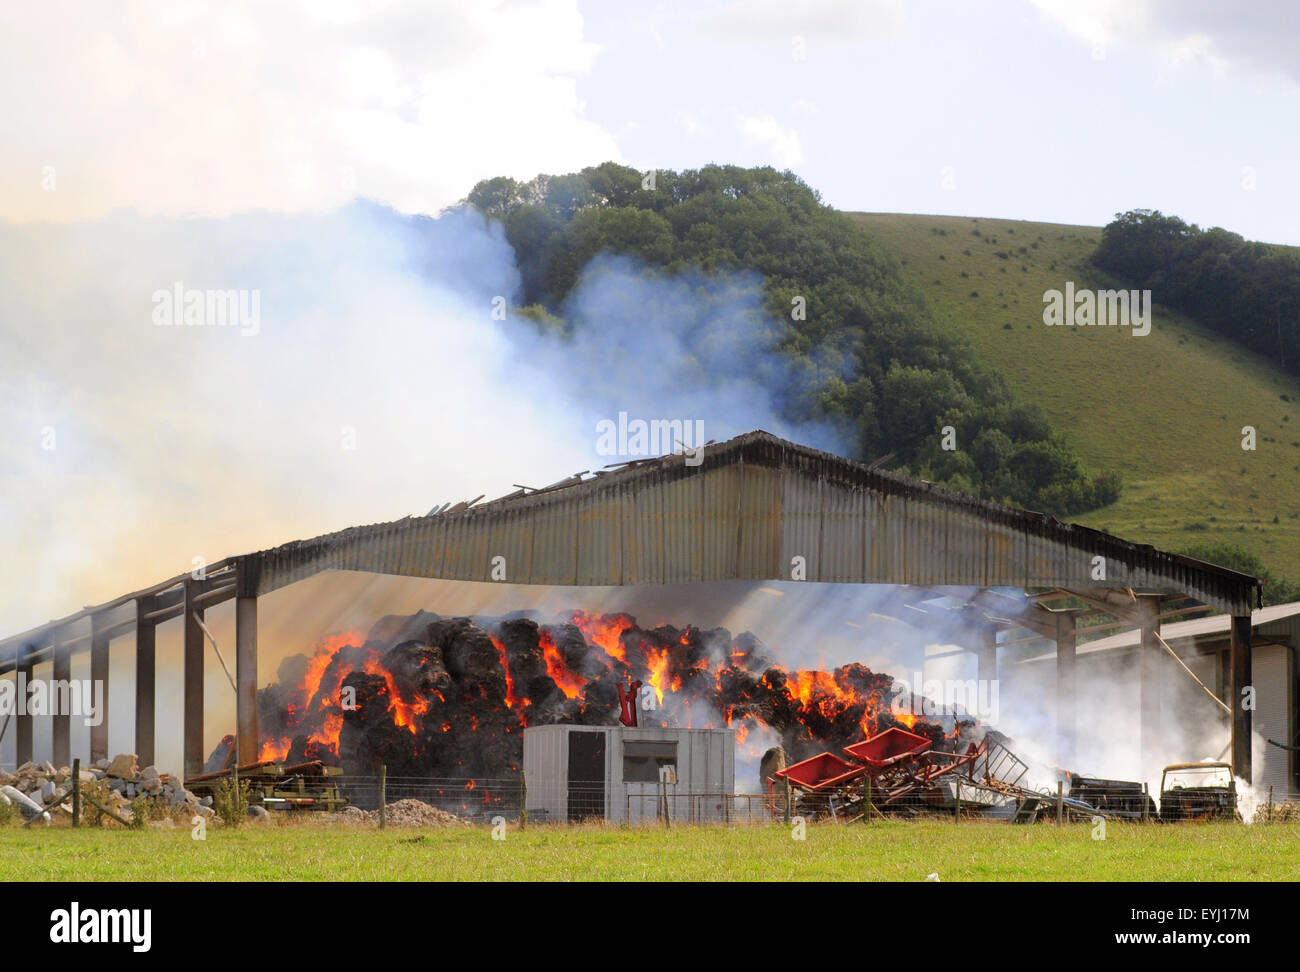 Plumpton, East Sussex, UK..30 July 2015..Fire Service contain Fire in new hay and straw storage barn at Plumpton Agricultural College. Intense heat is being generated. Farm Manager spoke highly of the Fire Service who could be on scene for some days. Any increse in the wind could cause problems Stock Photo